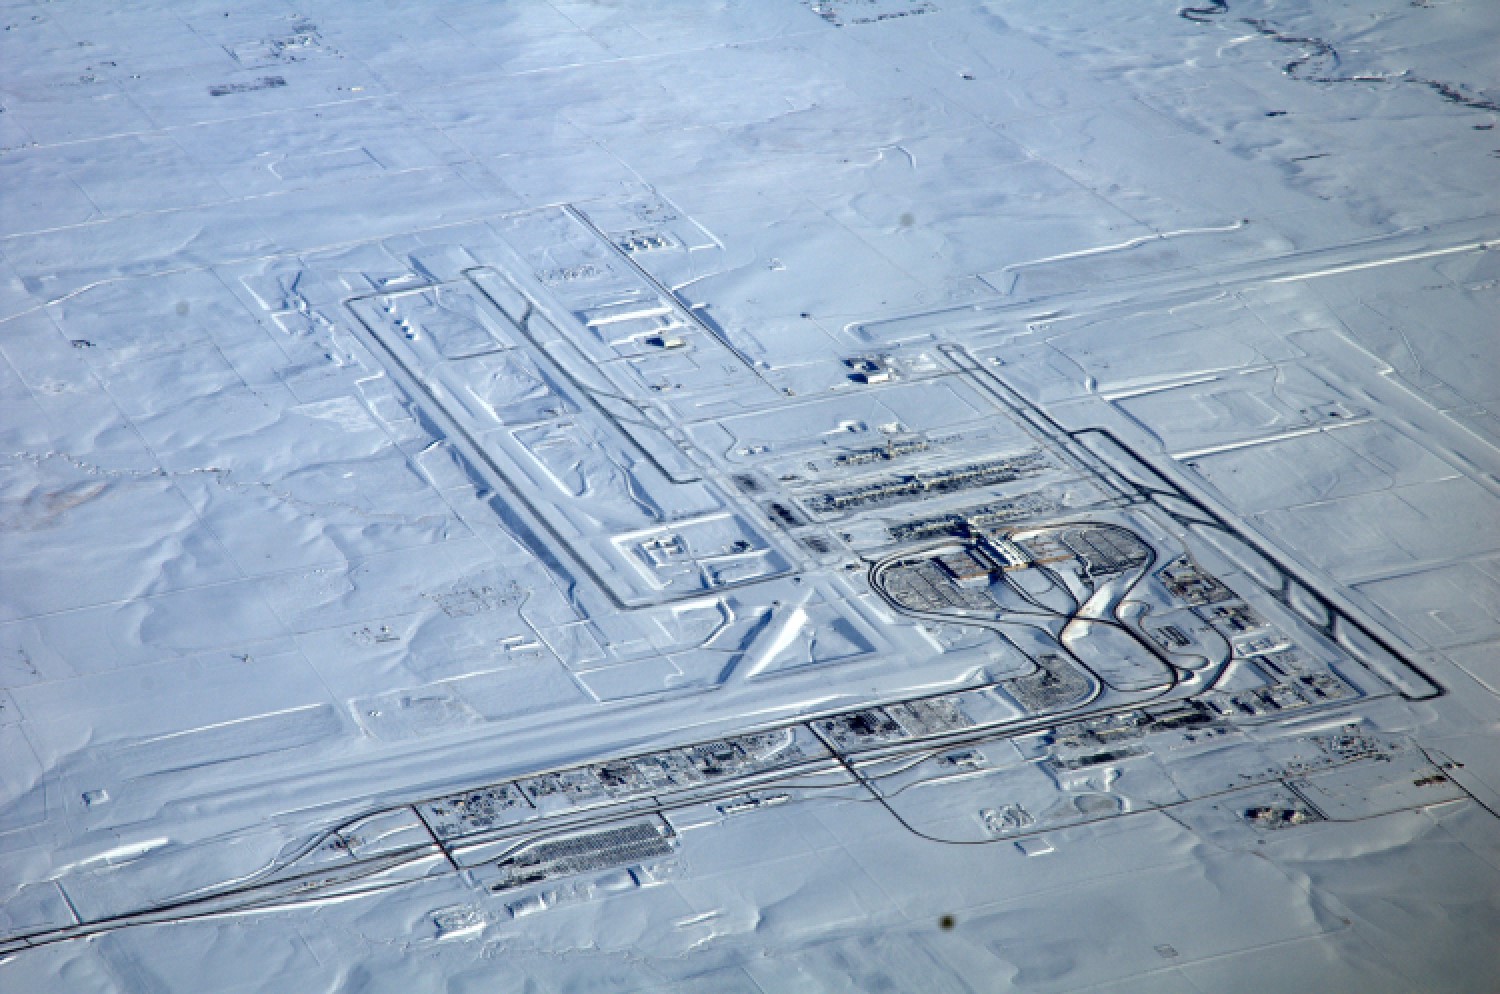 Denver is the second biggest airport in the world